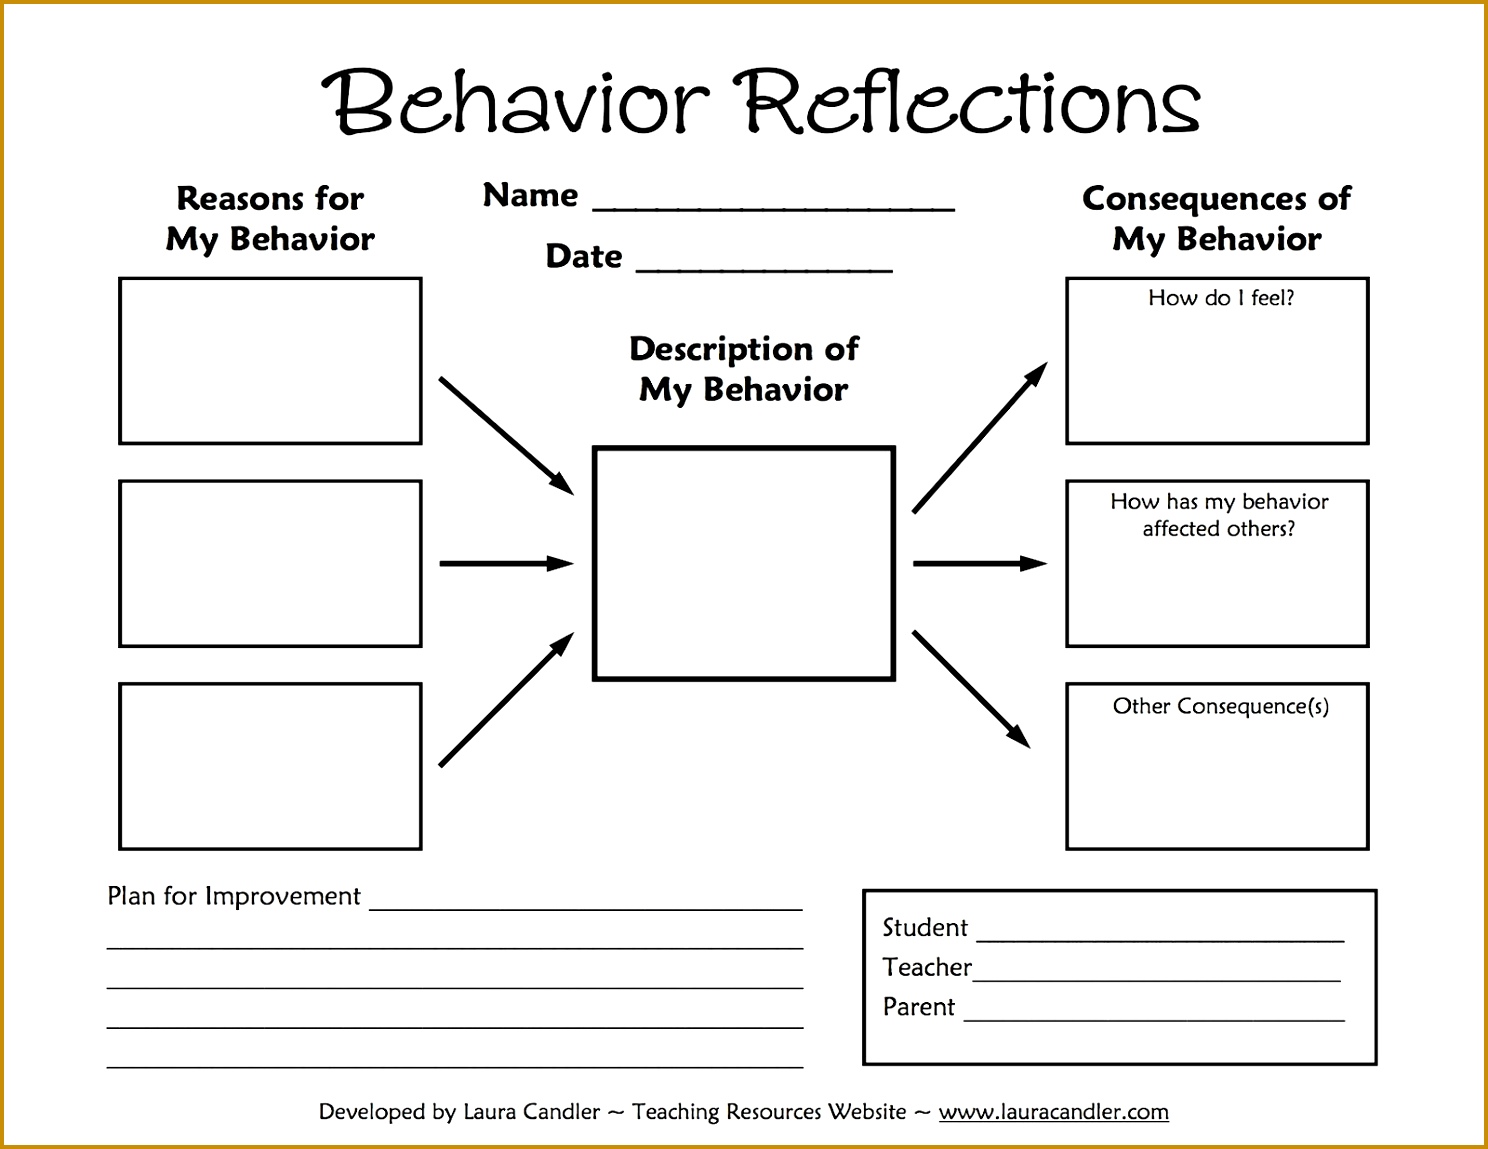 Use this graphic organizer instead of the typical "time out" form to have students reflect on why they made the choices they made and 11491488